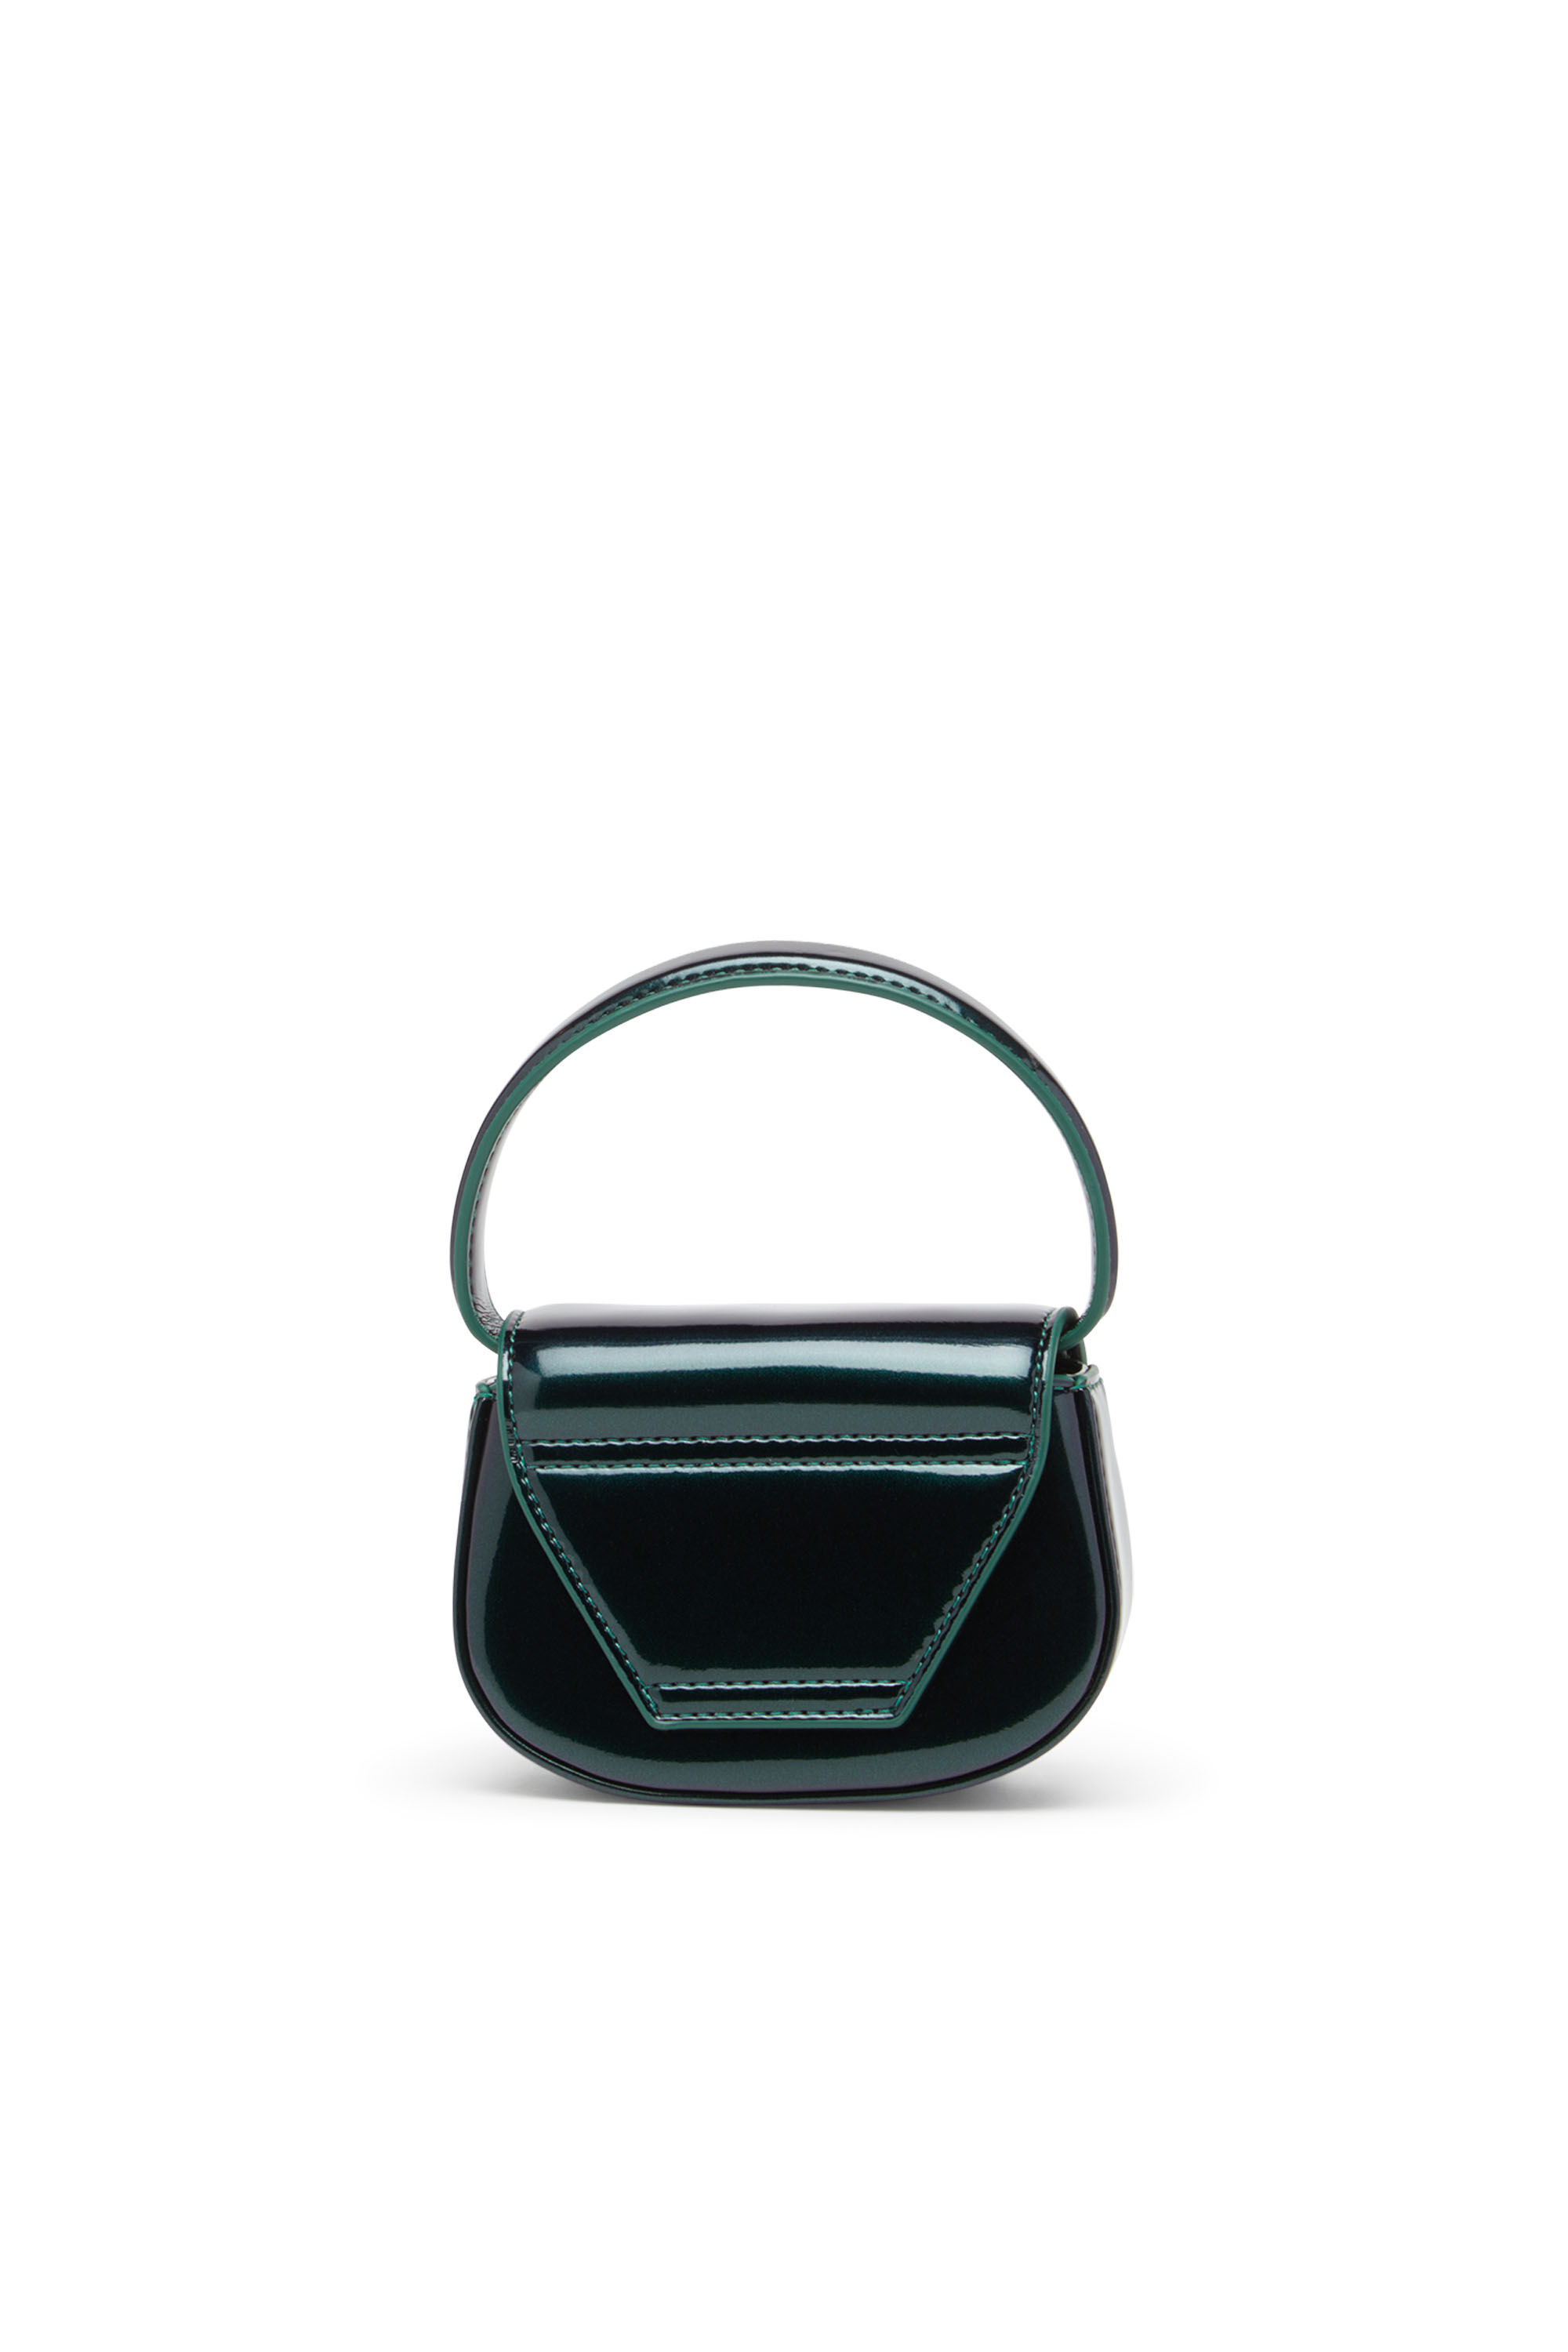 Diesel - 1DR XS, Woman 1DR XS-Iconic iridescent mini bag in Multicolor - Image 3